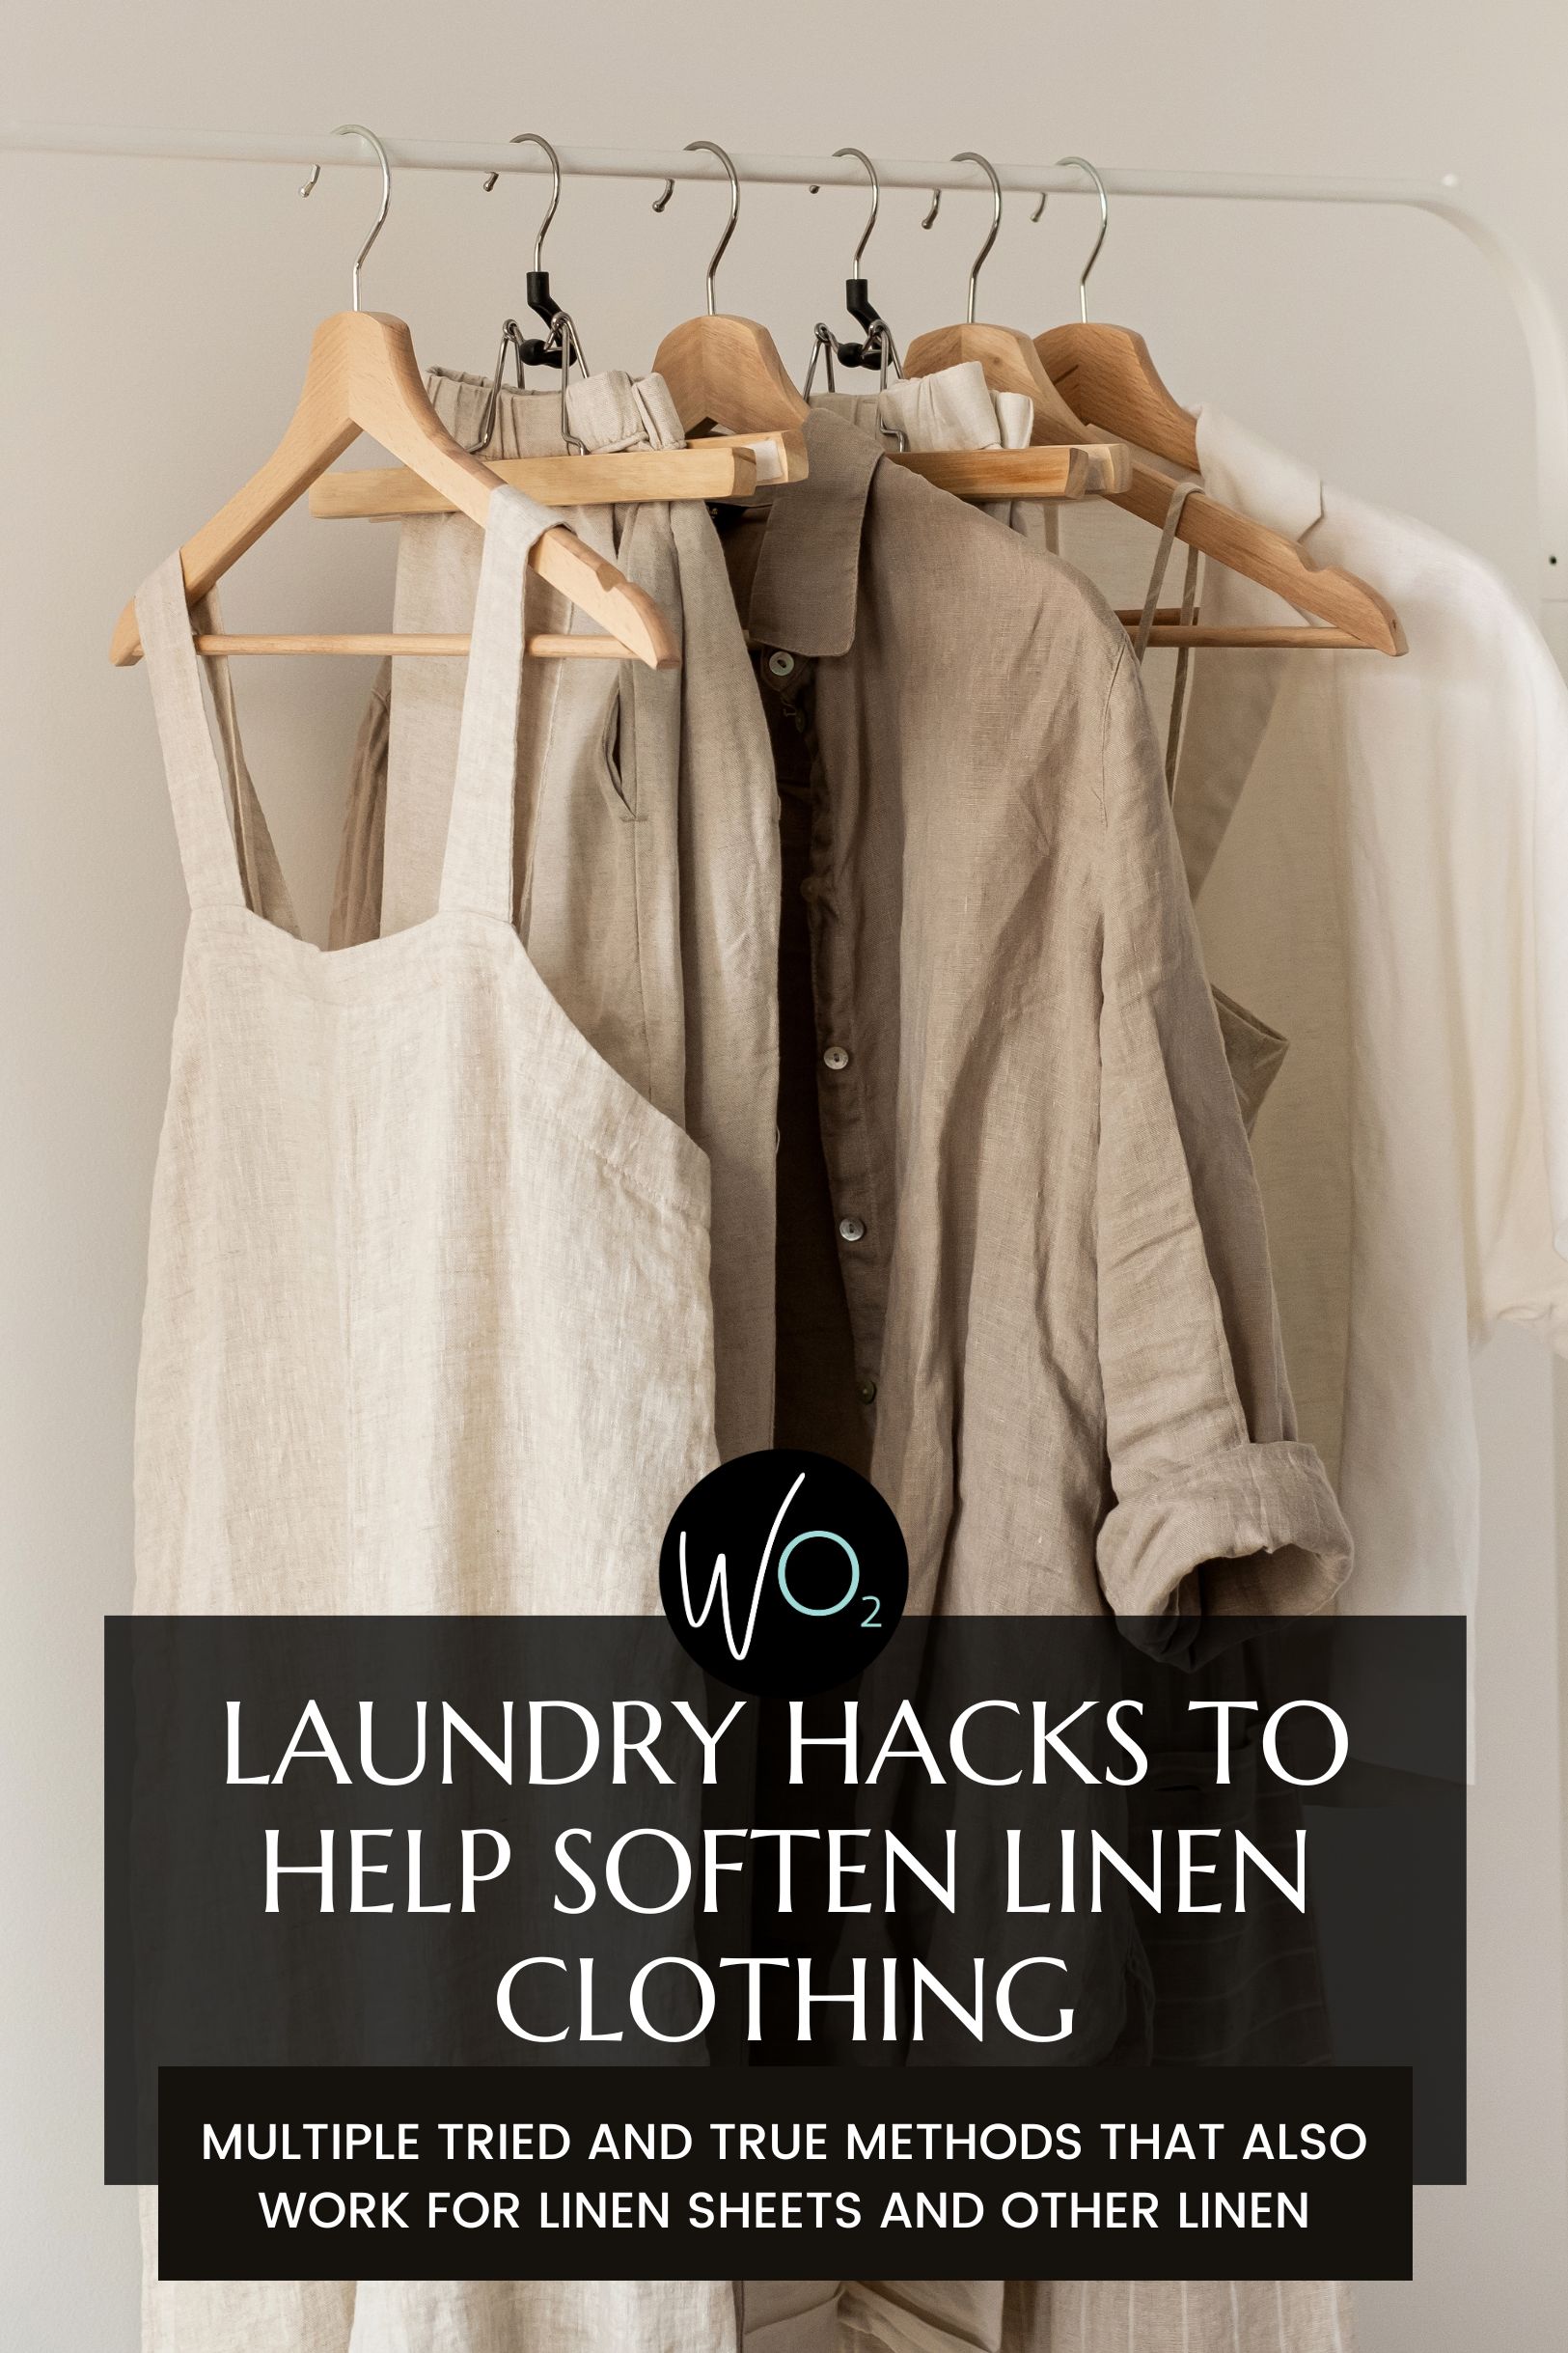 How to Soften Linen Clothes